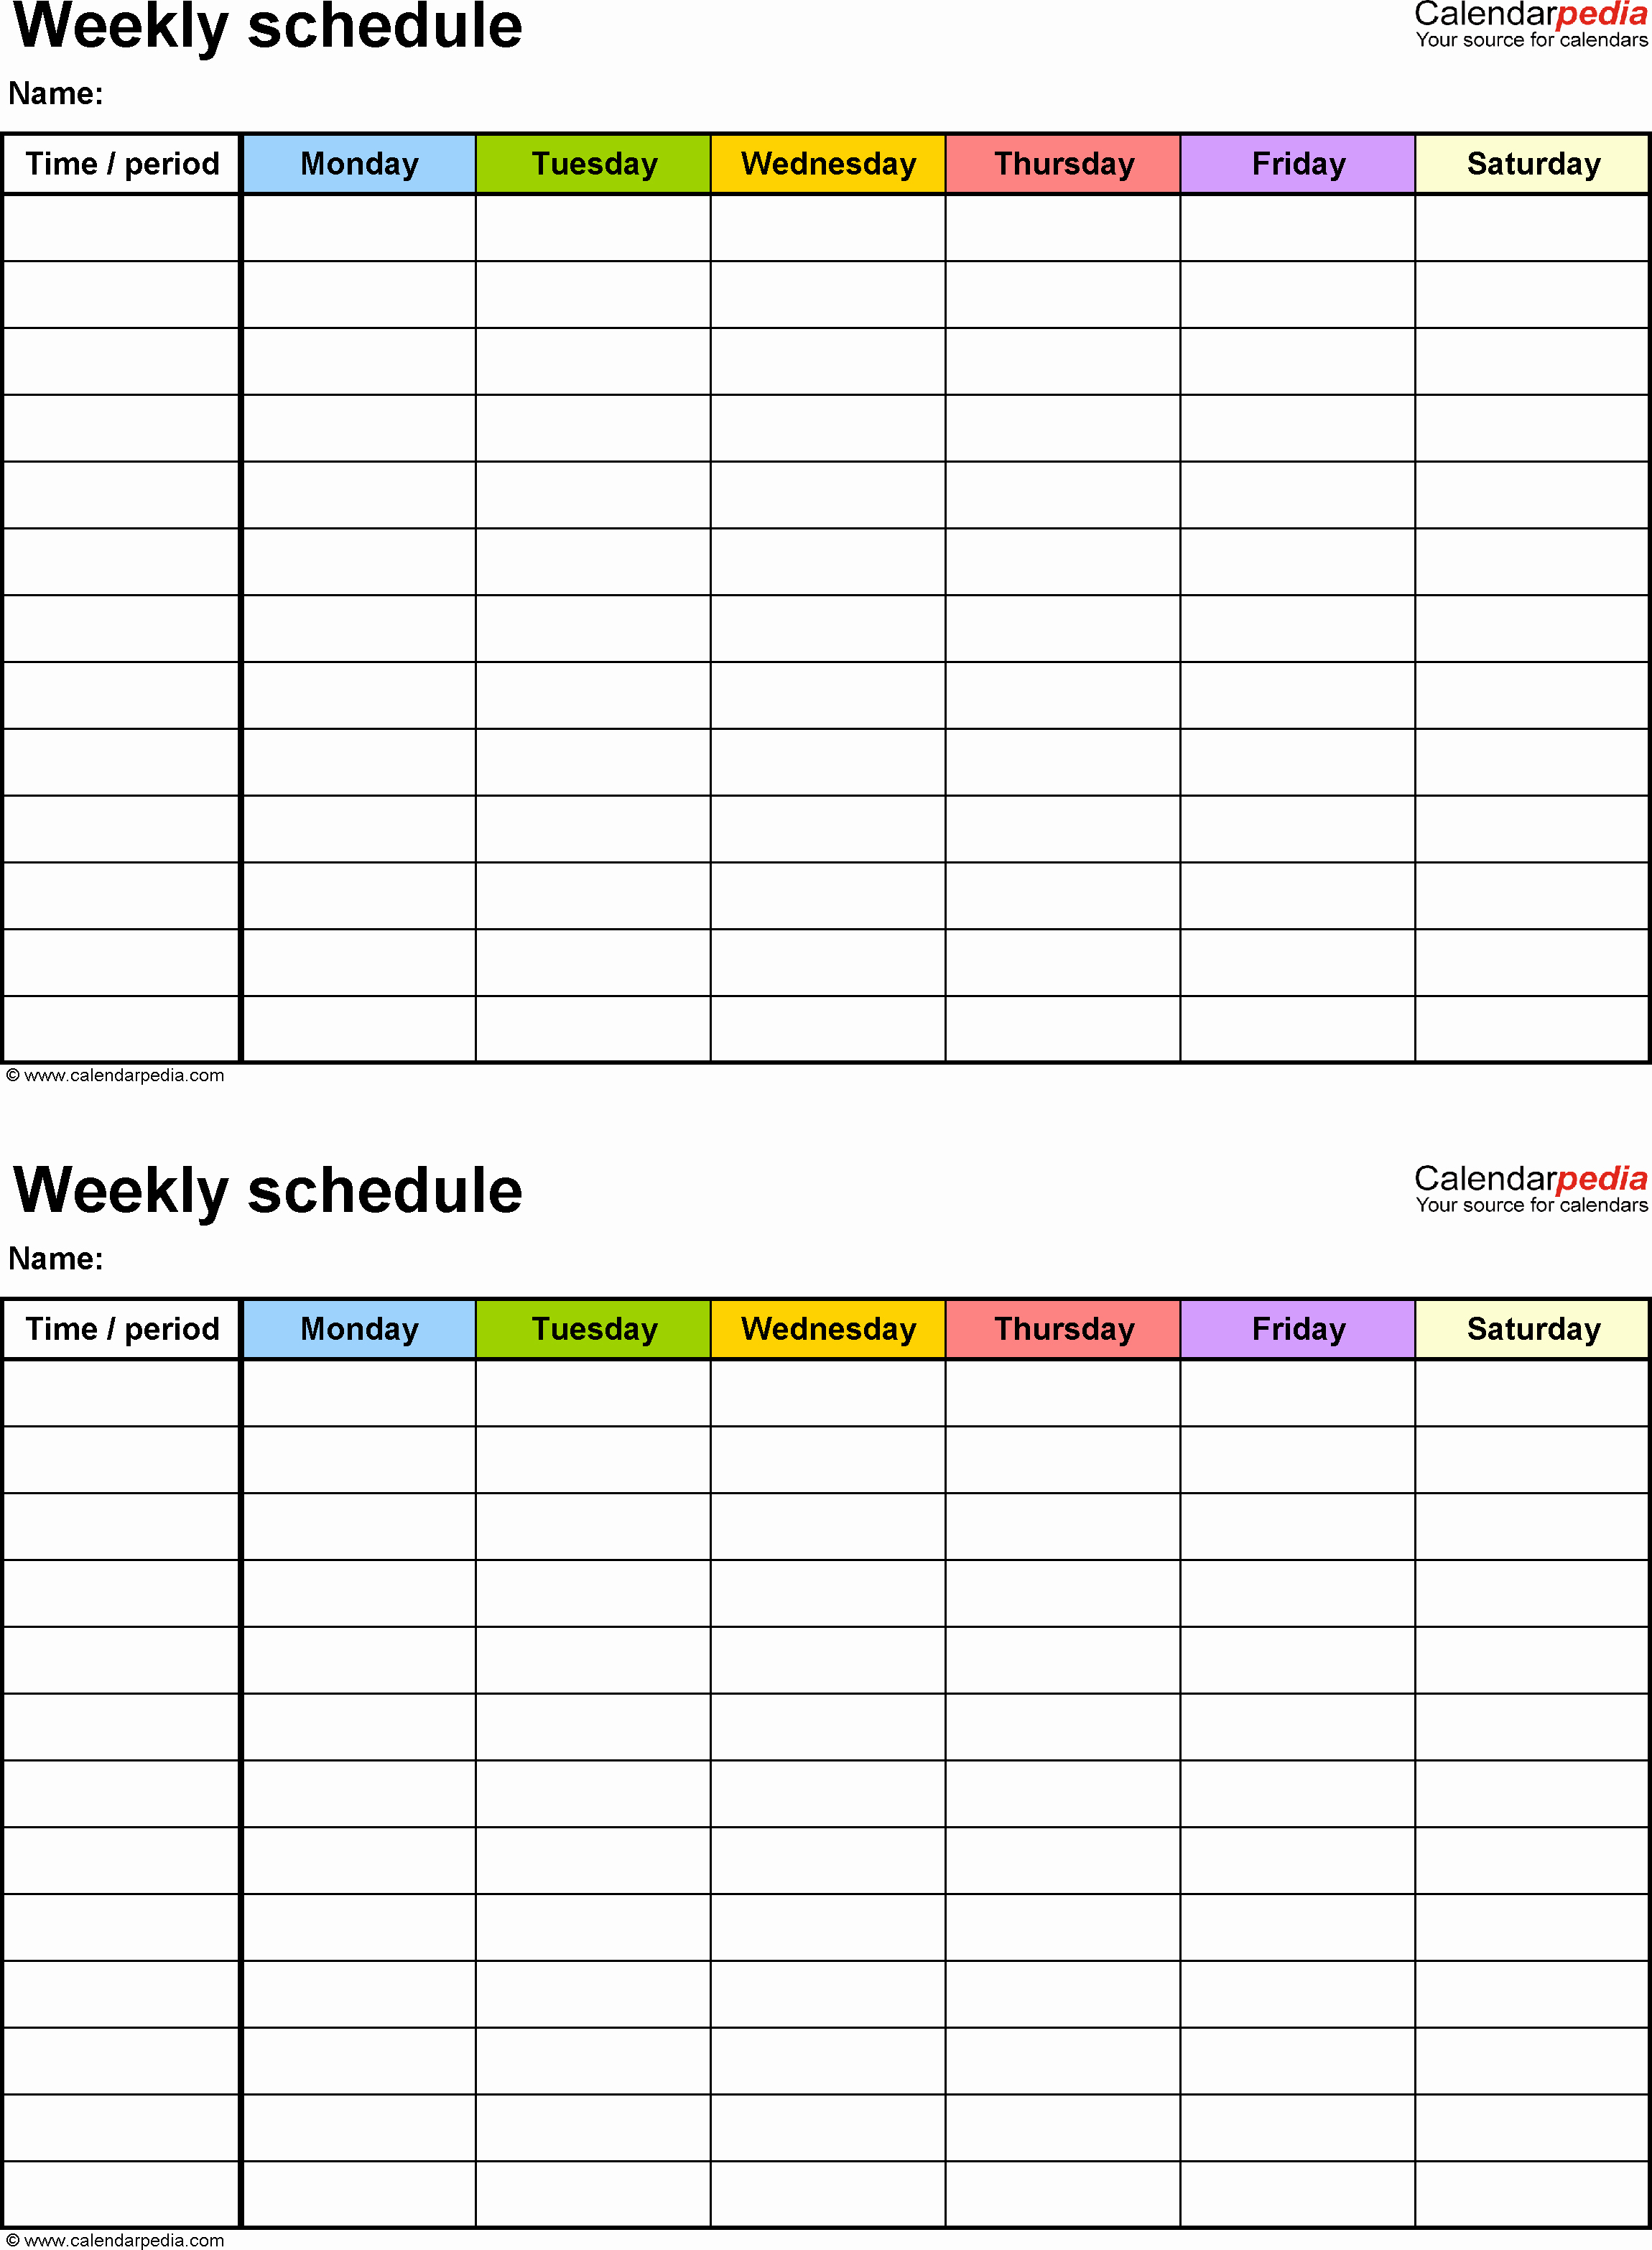 Free Weekly Schedule Templates for Excel 18 Templates